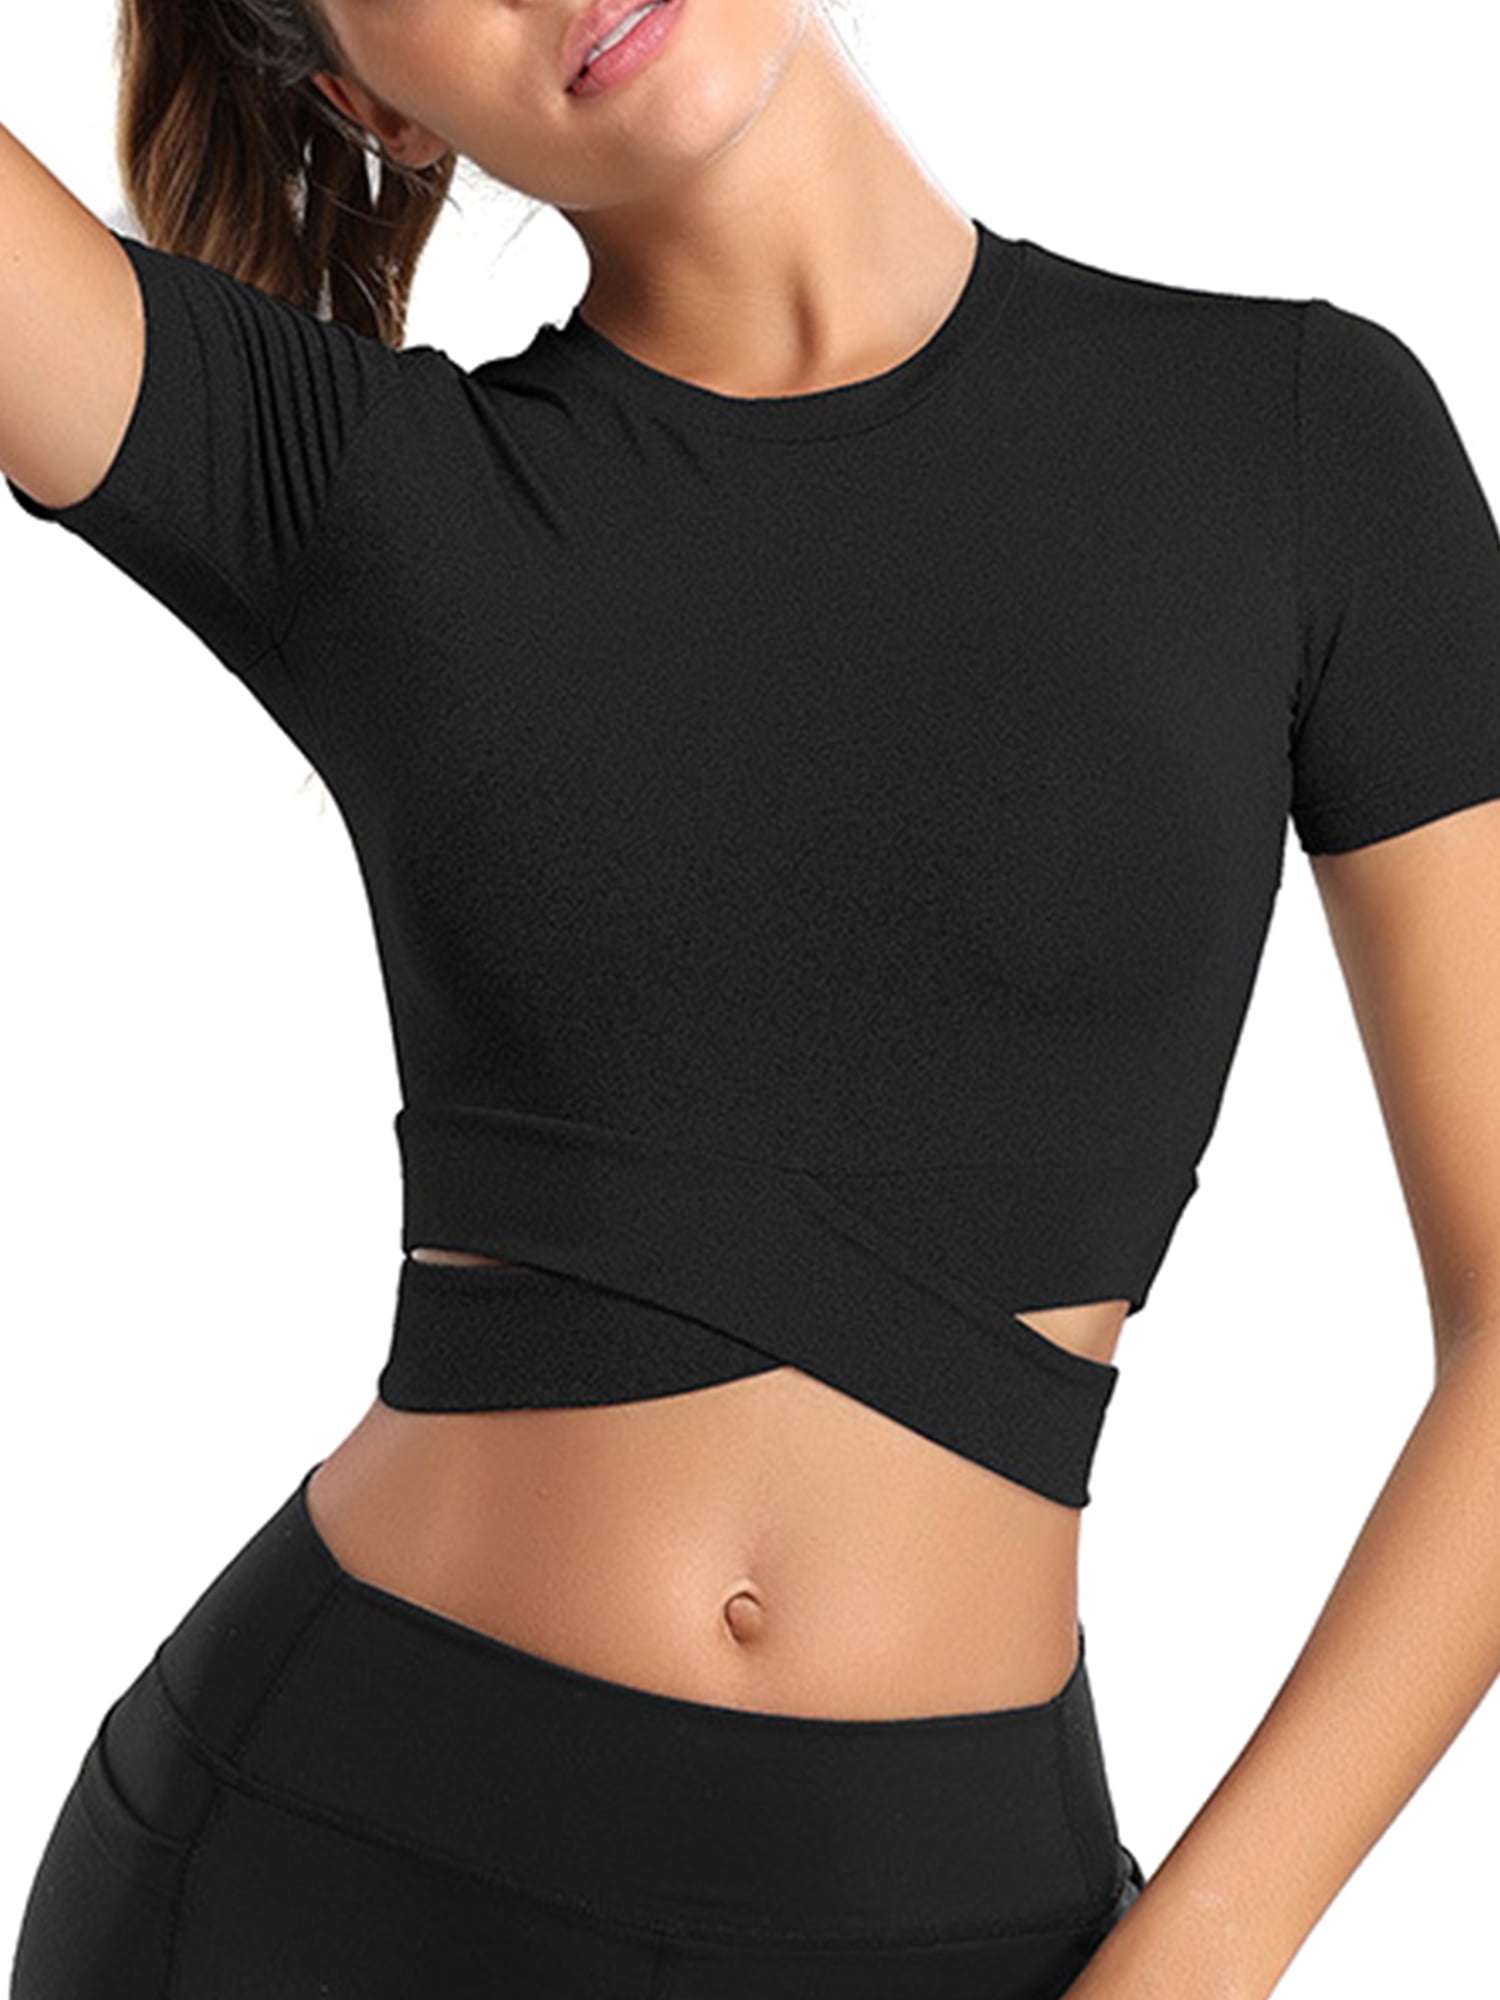 Amplify Long Sleeve Top Seamless Yoga Top Sportswear Active Wear Workout  Tops For Women Fitness Gym Crop Top Athletic Gym Shirt - AliExpress